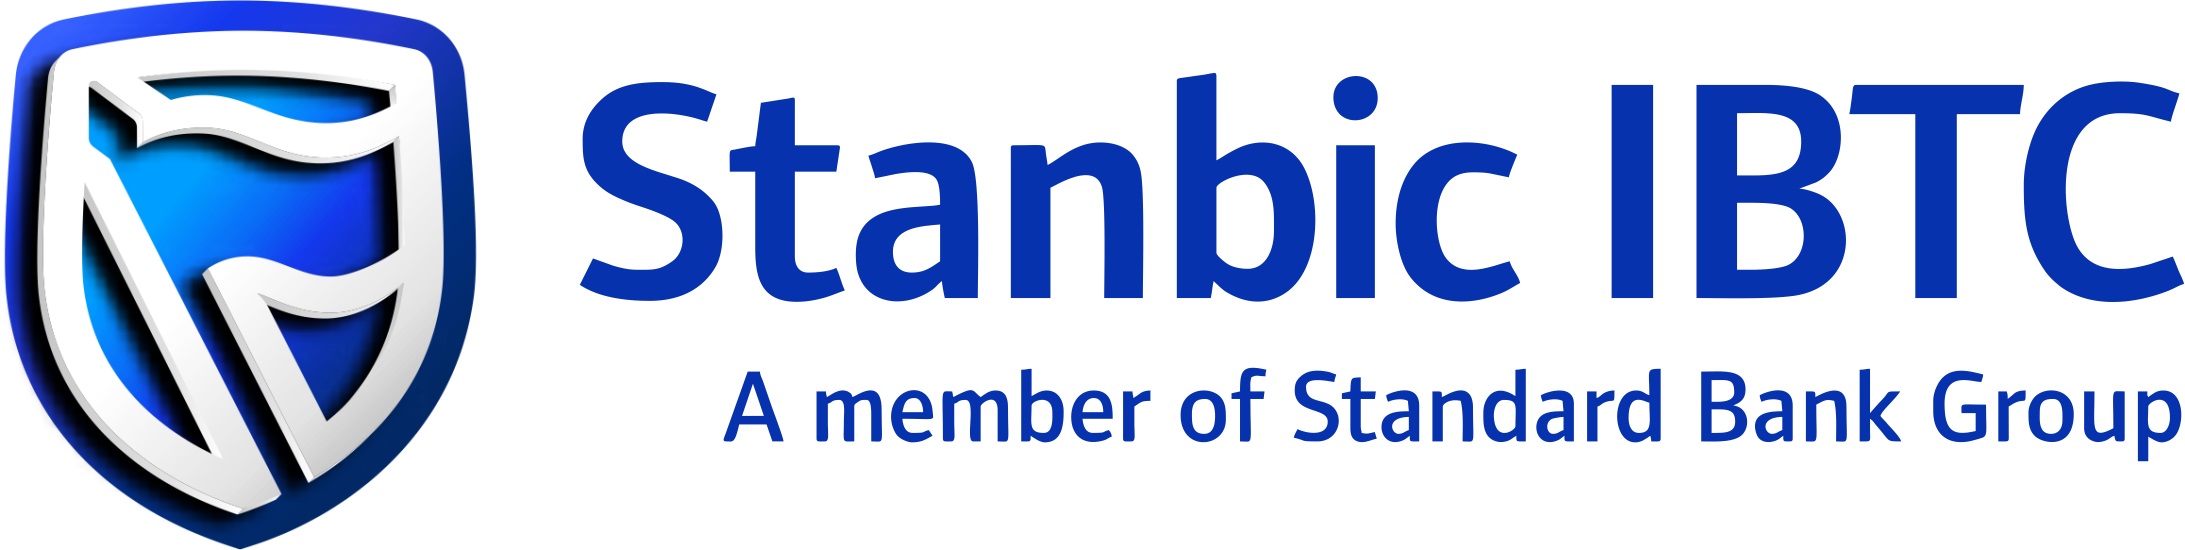 Stanbic IBTC Gives N34.8m In Scholarship to Successful UTME Students Brandspurng